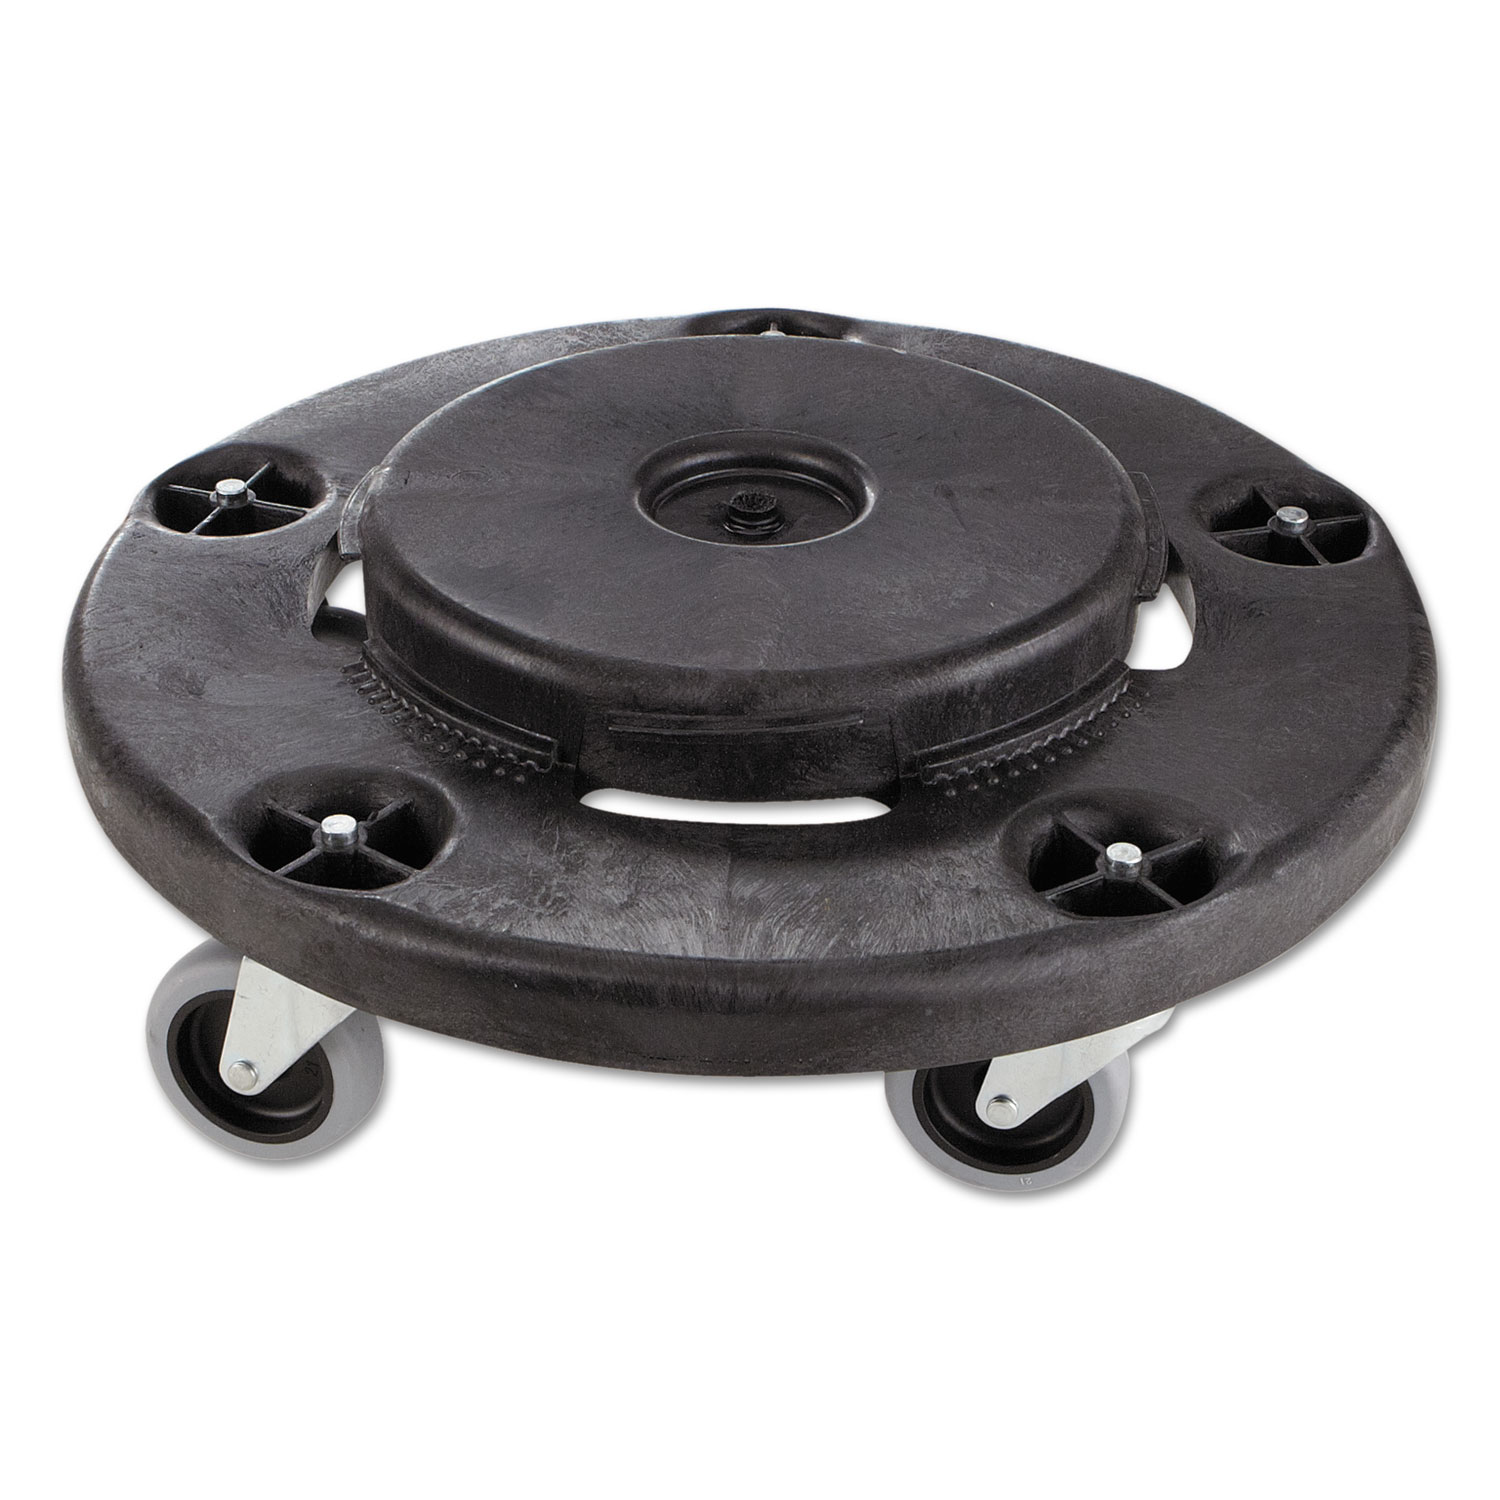 Rubbermaid Black Plastic Twist On Conversion Dolly For Up To 55 gal BRUTE®  Trash Receptacles